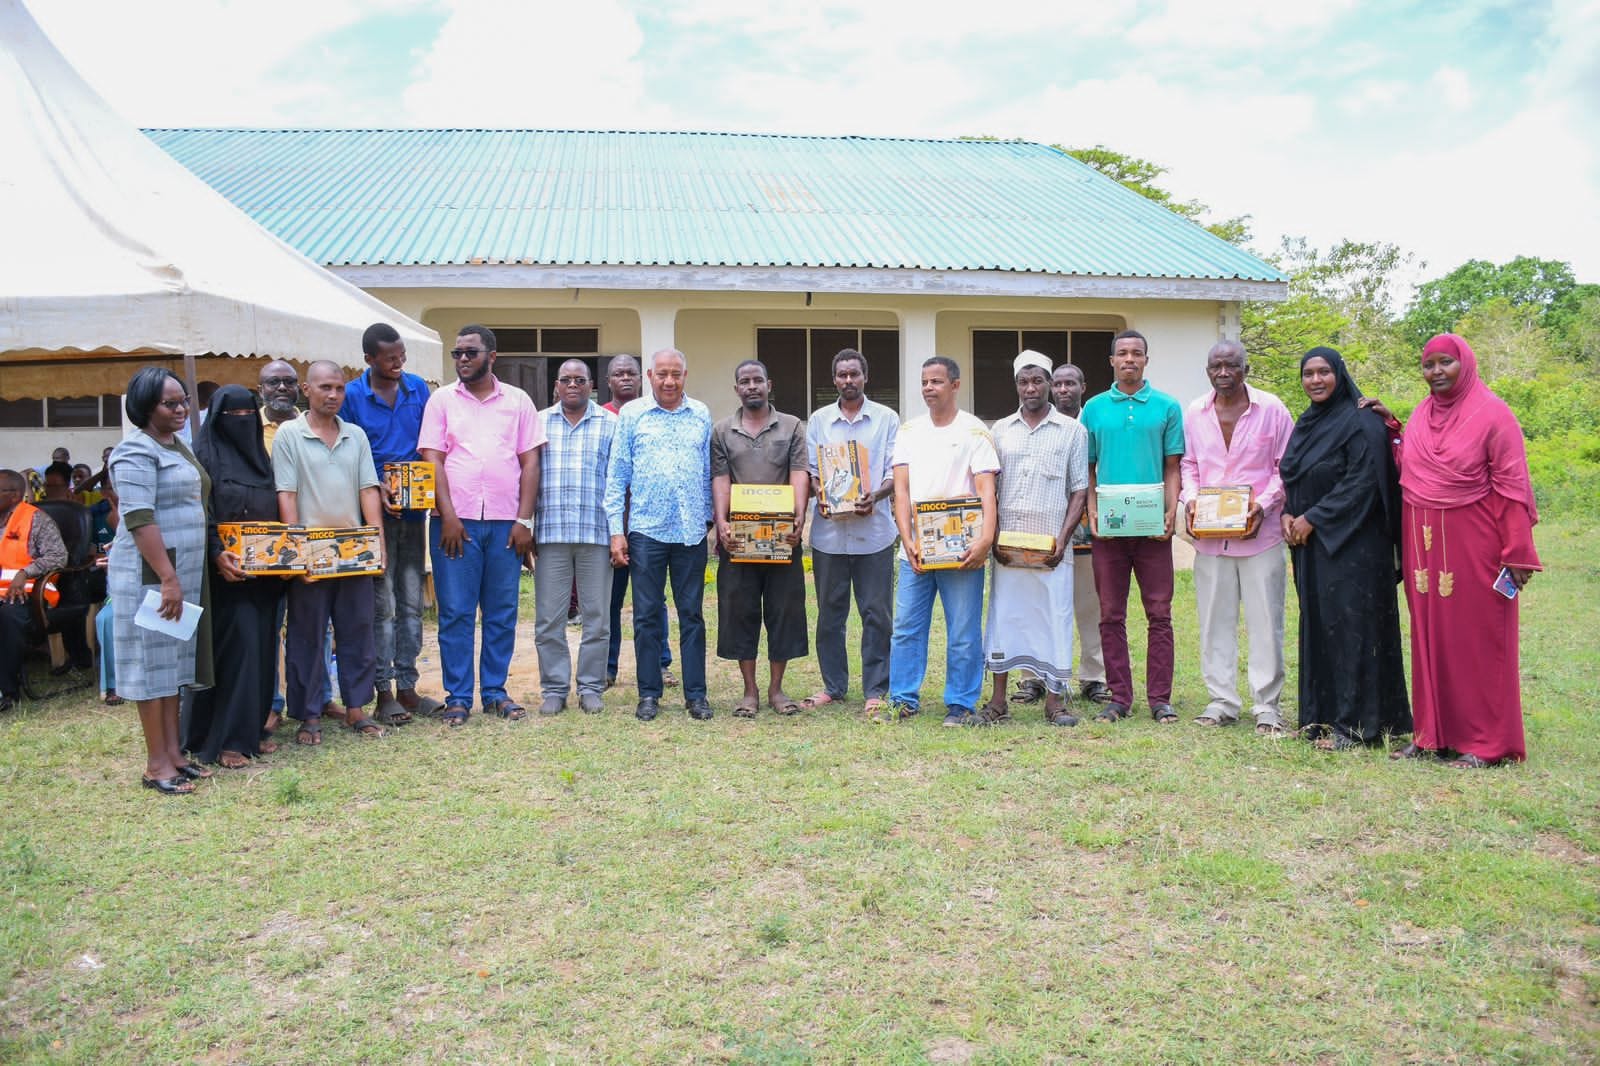 EMPOWERING THE YOUTH: Governor Timamy gives VTC graduates from Witu start-up kits to start their own businesses.